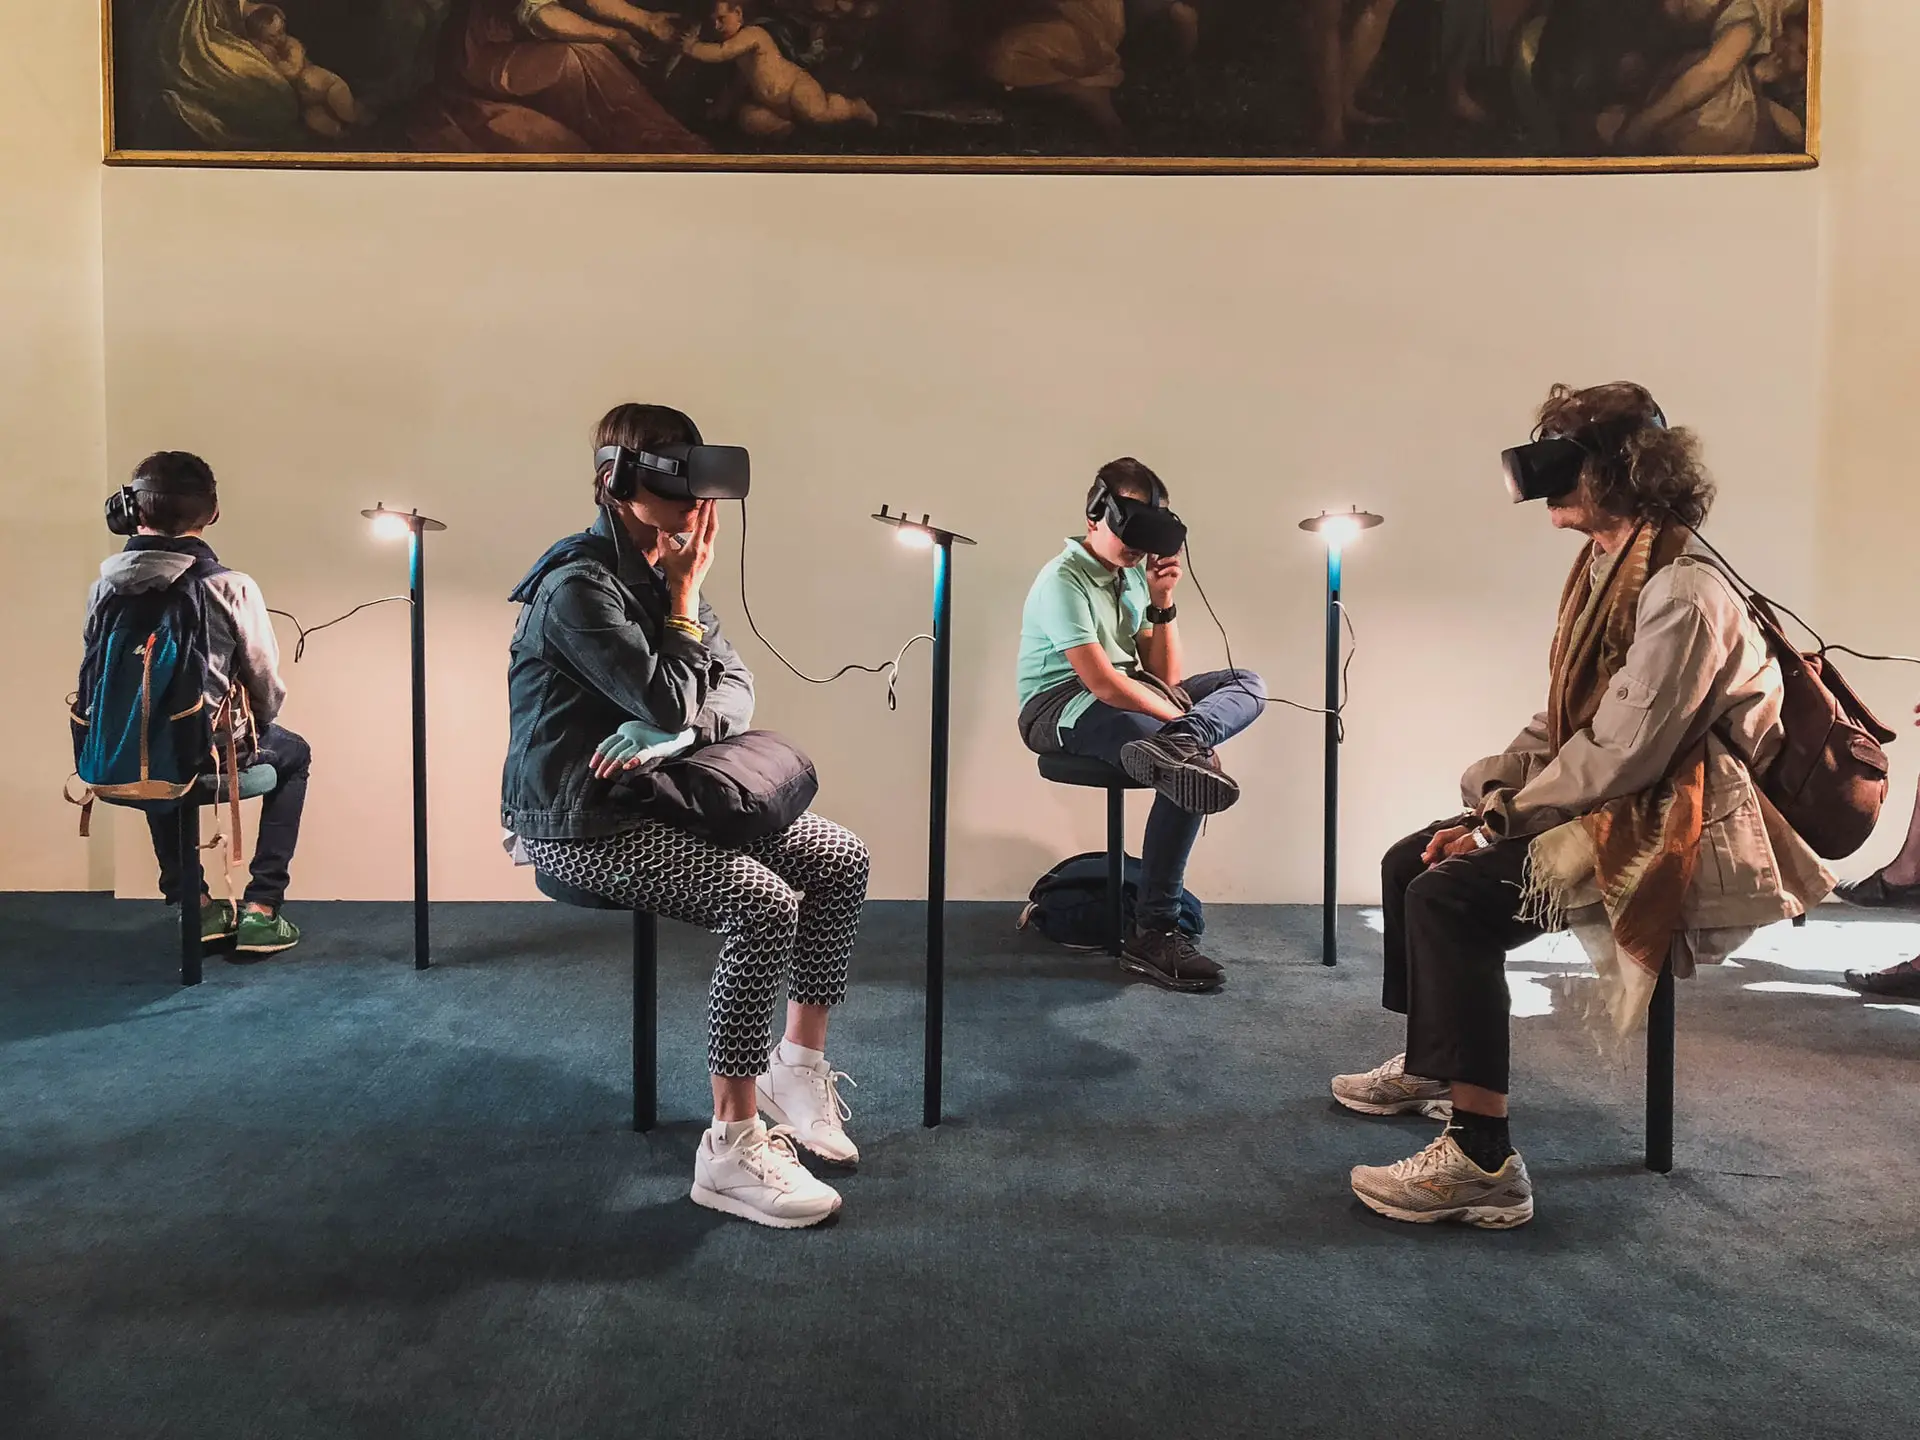 Stanford Professor Introduces the University’s First Class to Be Entirely Taught in VR